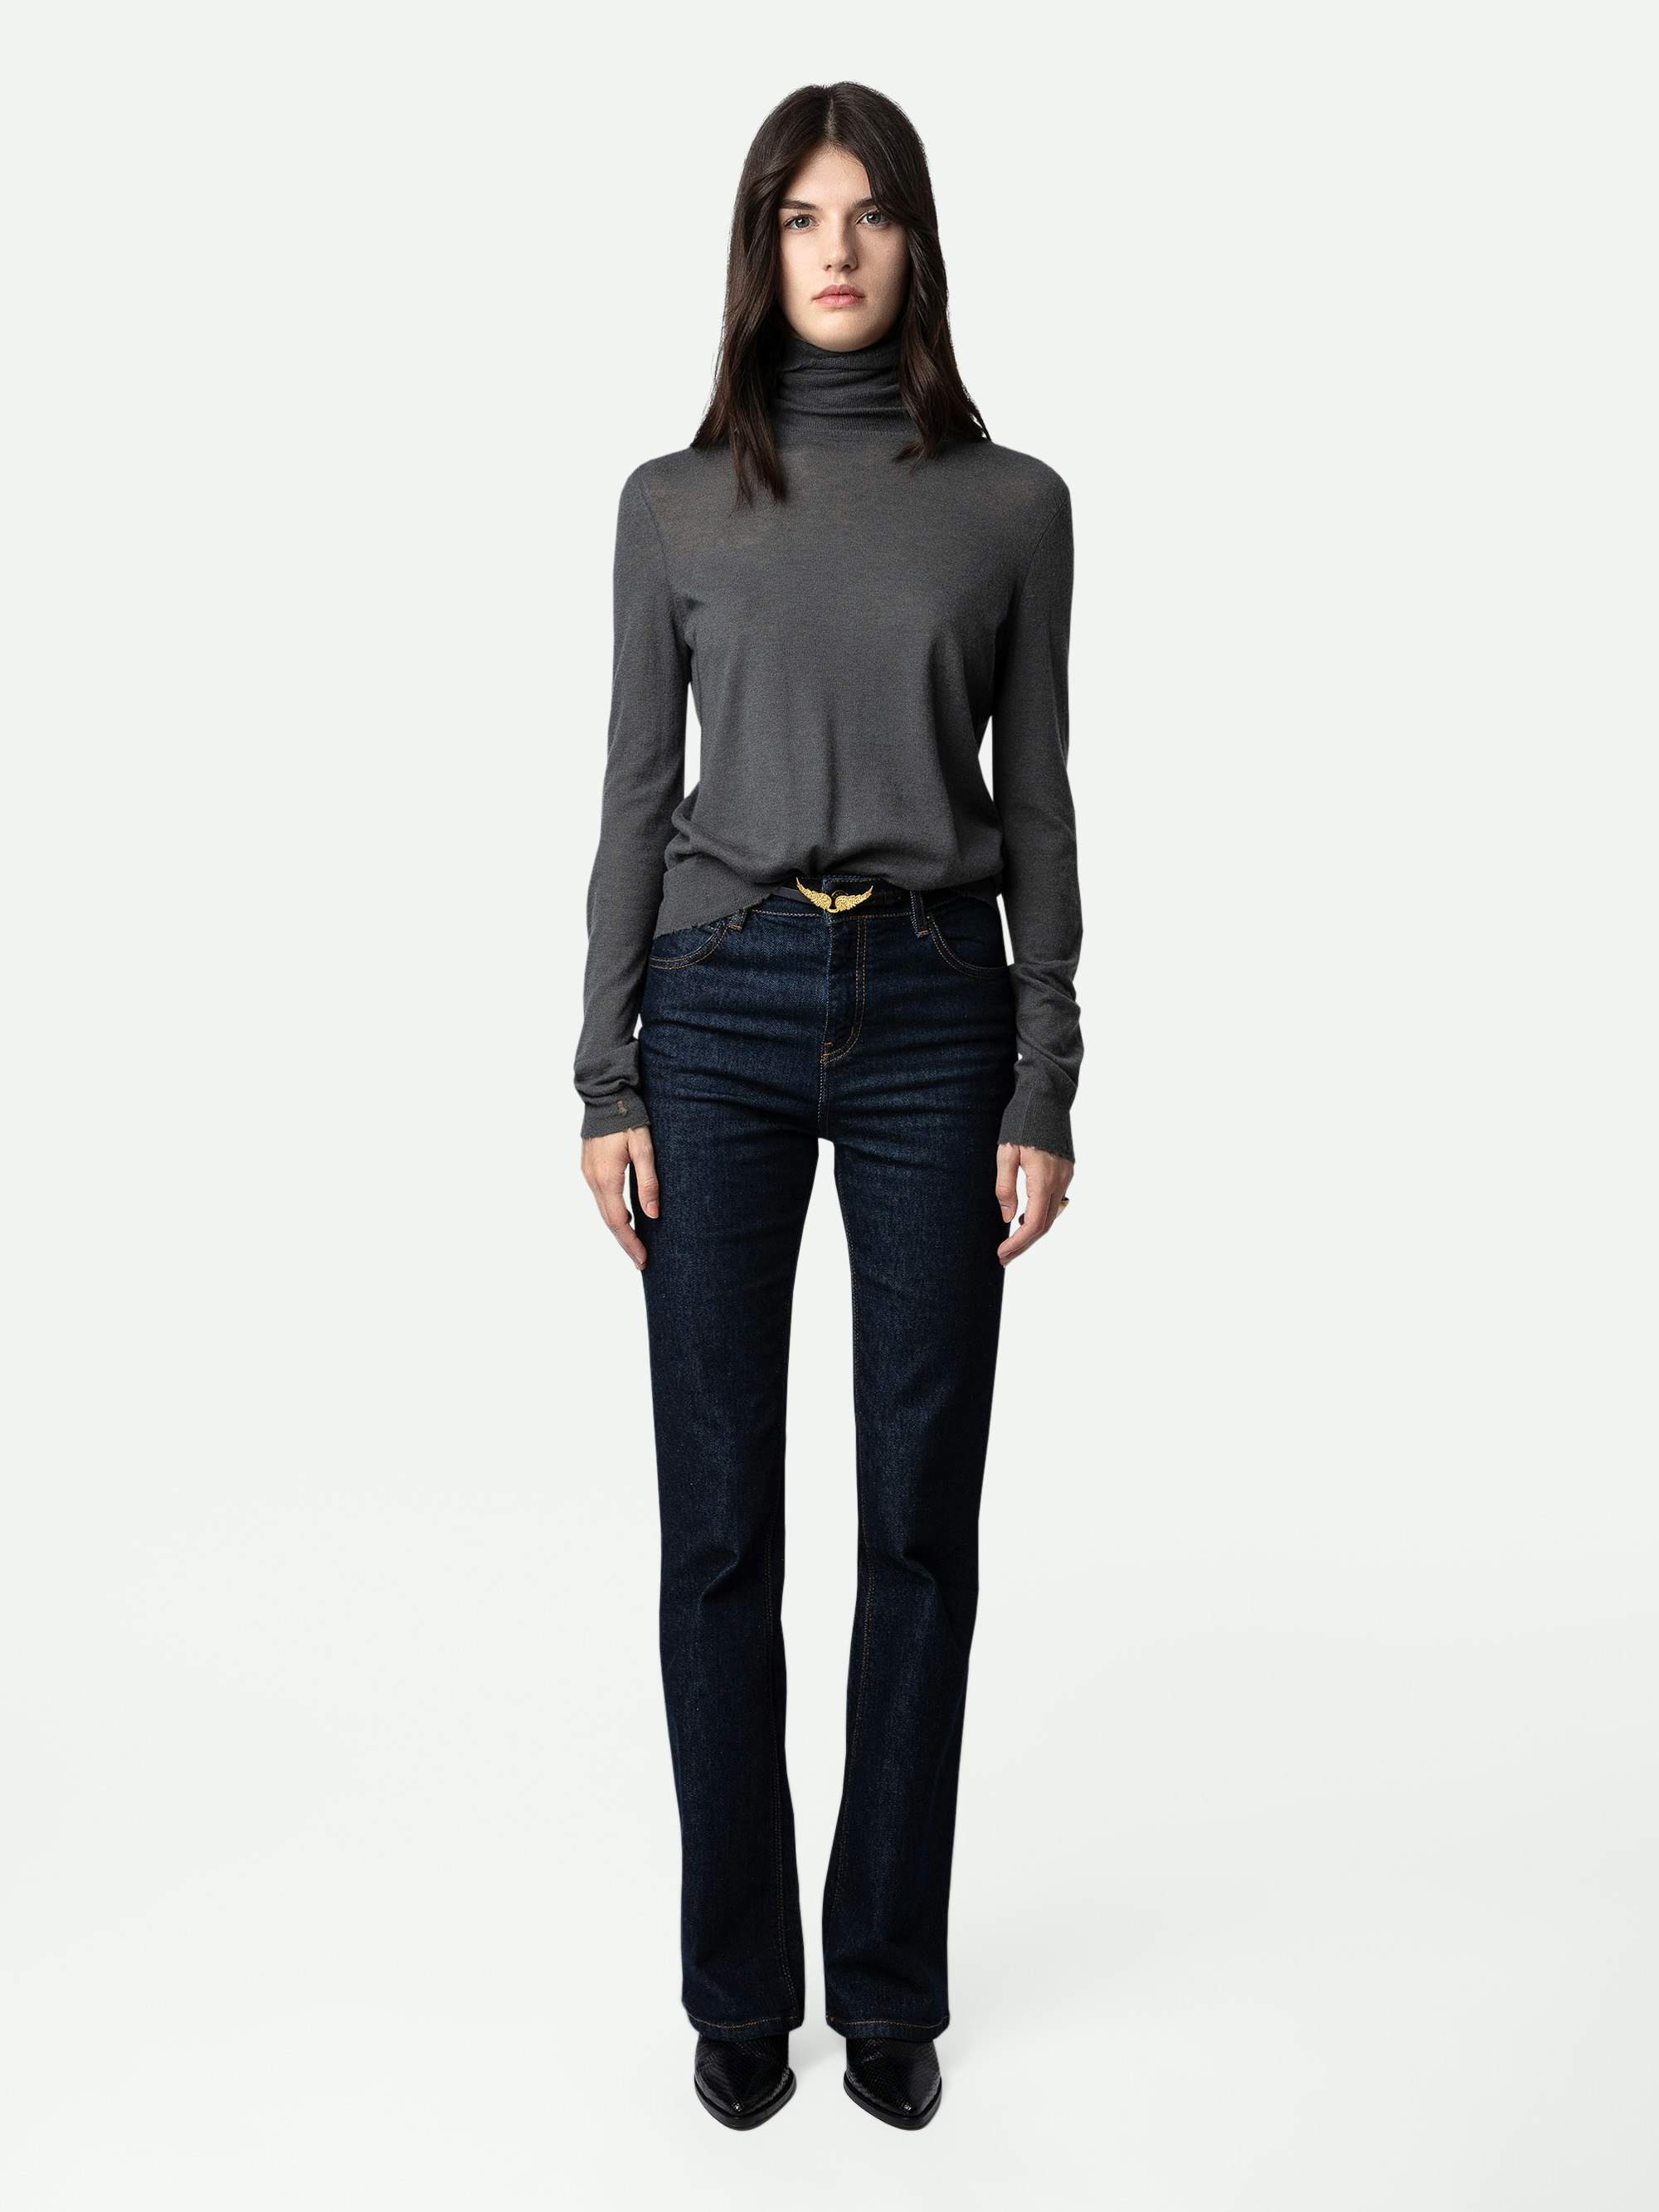 Bobby Jumper 100% Cashmere - Women's Bobby grey feather 100% cashmere turtleneck jumper with long sleeves.